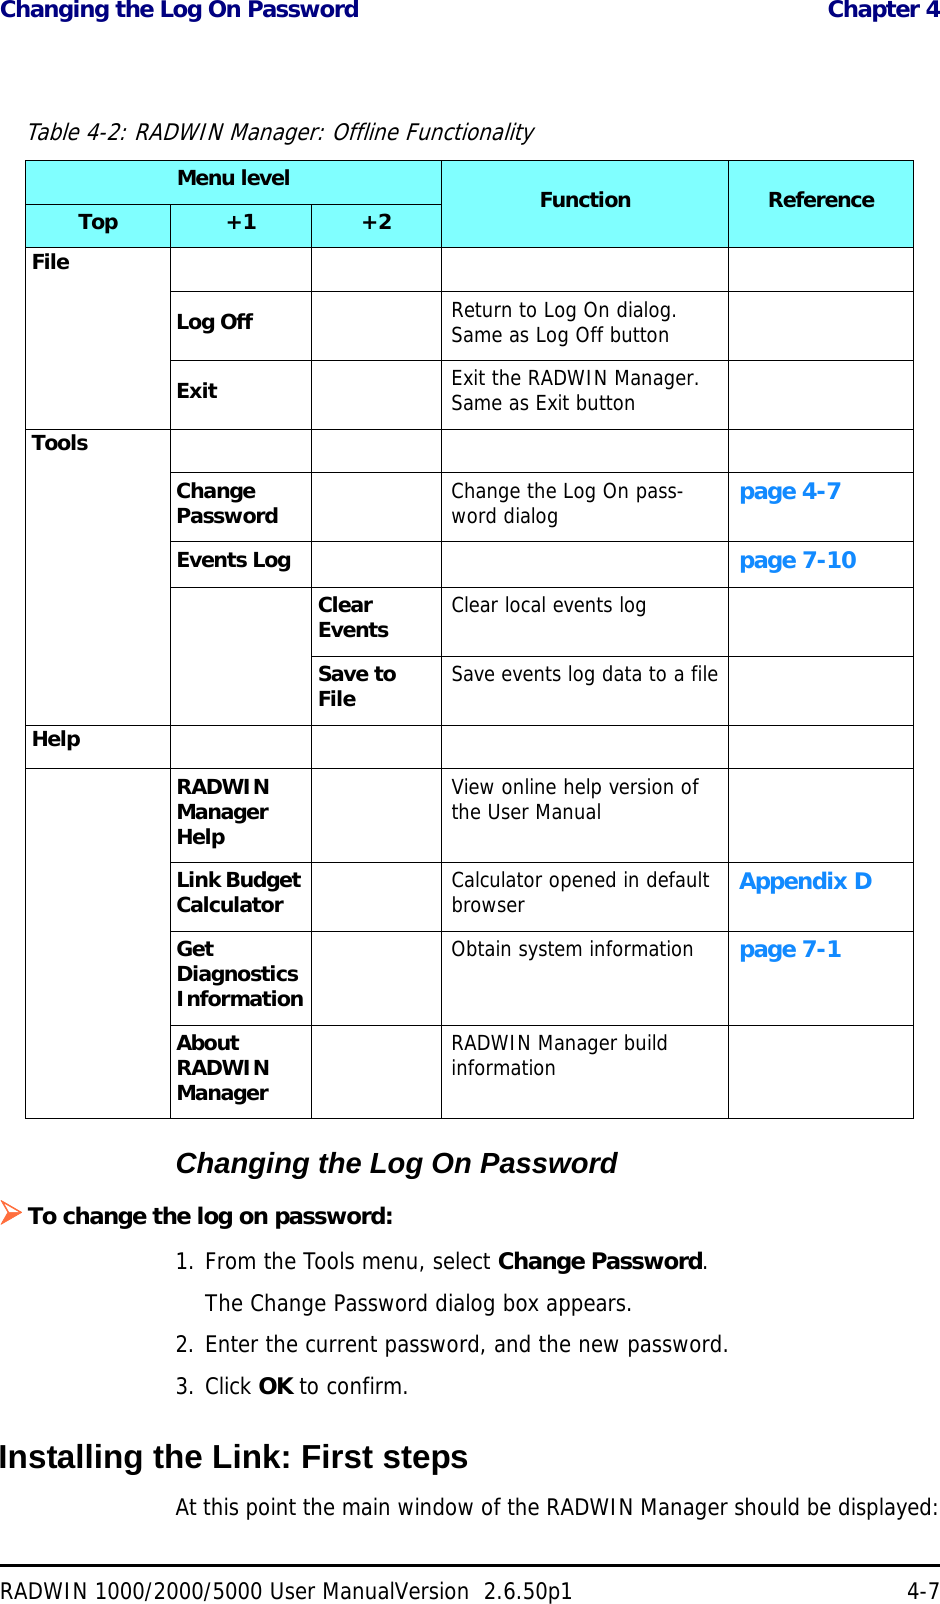 Changing the Log On Password  Chapter 4RADWIN 1000/2000/5000 User ManualVersion  2.6.50p1 4-7Changing the Log On PasswordTo change the log on password:1. From the Tools menu, select Change Password.The Change Password dialog box appears.2. Enter the current password, and the new password.3. Click OK to confirm.Installing the Link: First stepsAt this point the main window of the RADWIN Manager should be displayed:Table 4-2: RADWIN Manager: Offline FunctionalityMenu level Function ReferenceTop +1 +2FileLog Off Return to Log On dialog. Same as Log Off buttonExit Exit the RADWIN Manager. Same as Exit buttonToolsChange Password Change the Log On pass-word dialog page 4-7Events Log page 7-10Clear Events Clear local events logSave to File Save events log data to a fileHelpRADWIN Manager HelpView online help version of the User ManualLink Budget Calculator Calculator opened in default browser Appendix DGet Diagnostics InformationObtain system information page 7-1About RADWIN ManagerRADWIN Manager build information